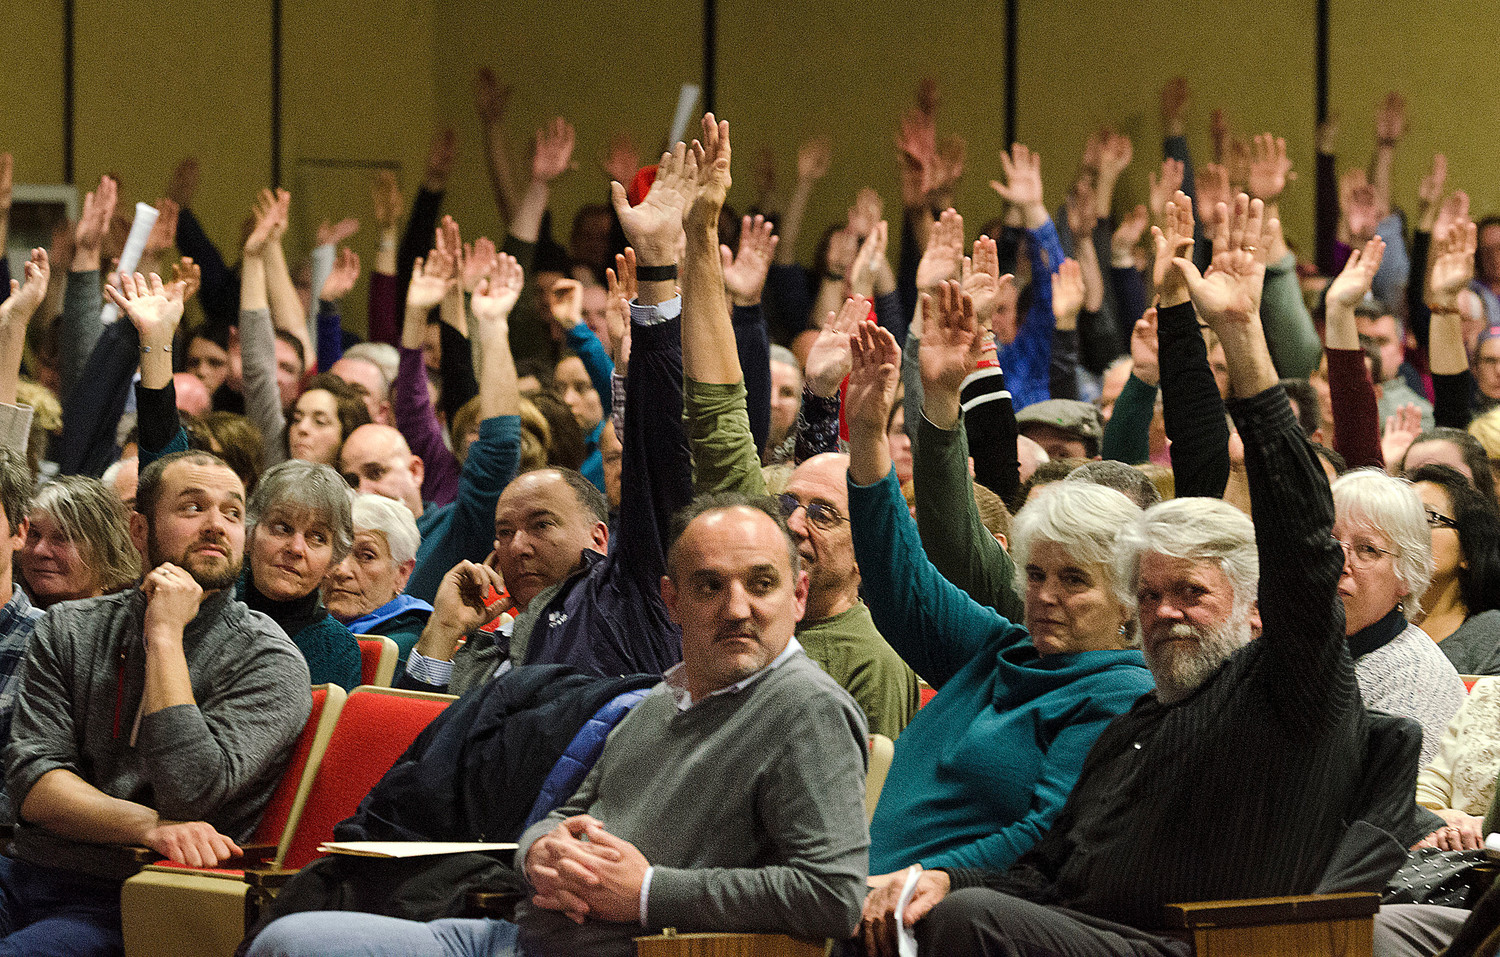 A large Westport crowd voted "by clear two thirds majority," declared Town Moderator Steven Fors, to approve construction of a new $97 million grade 5-12 school at Tuesday night’s special town meeting.